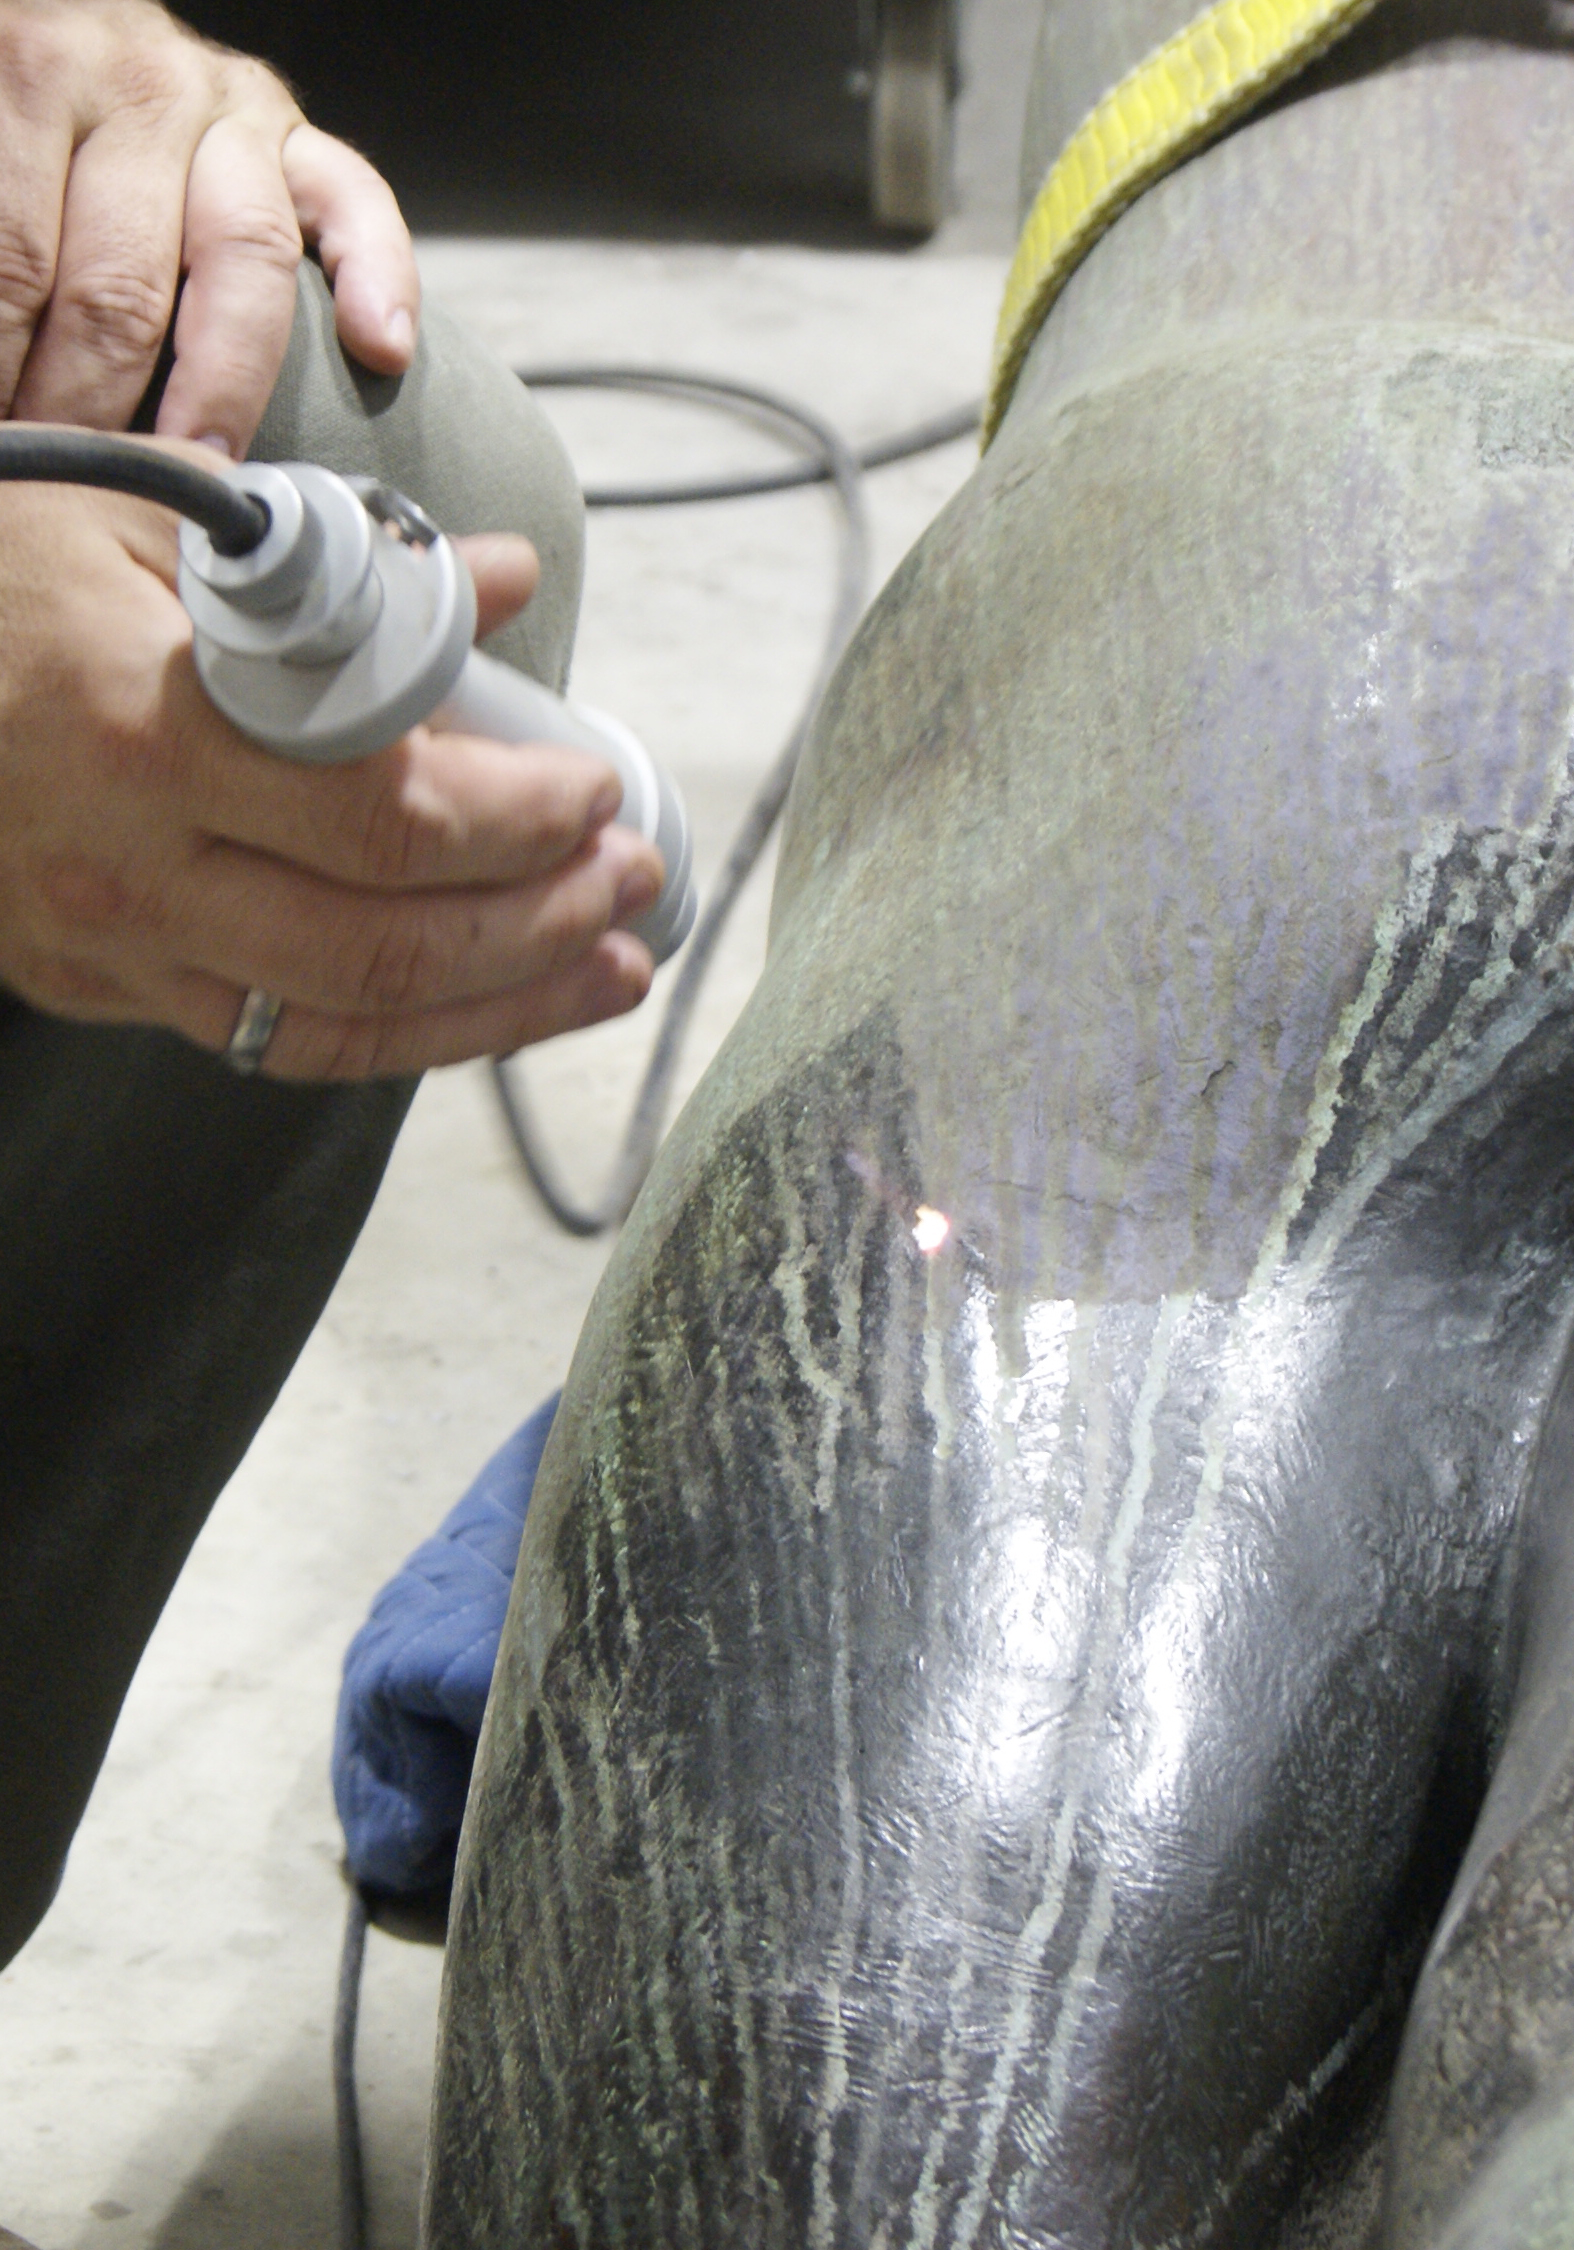 Conservator Adam Jenkins uses laser technology to carefully remove the corrosion on the bronze